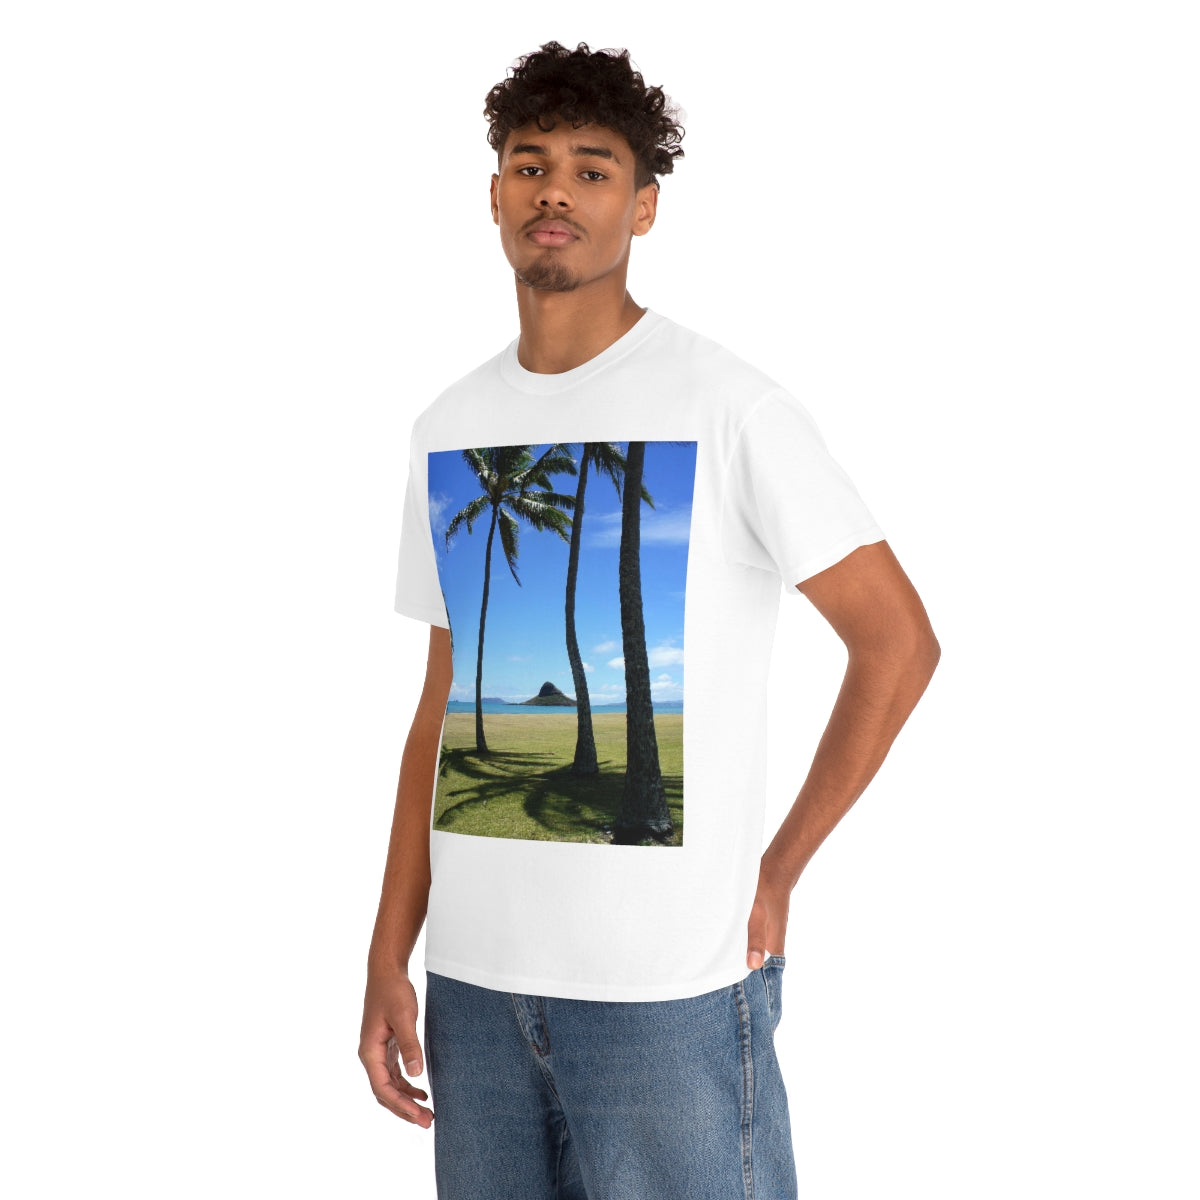 Visionary Dreams - Unisex Heavy Cotton Tee - Fry1Productions